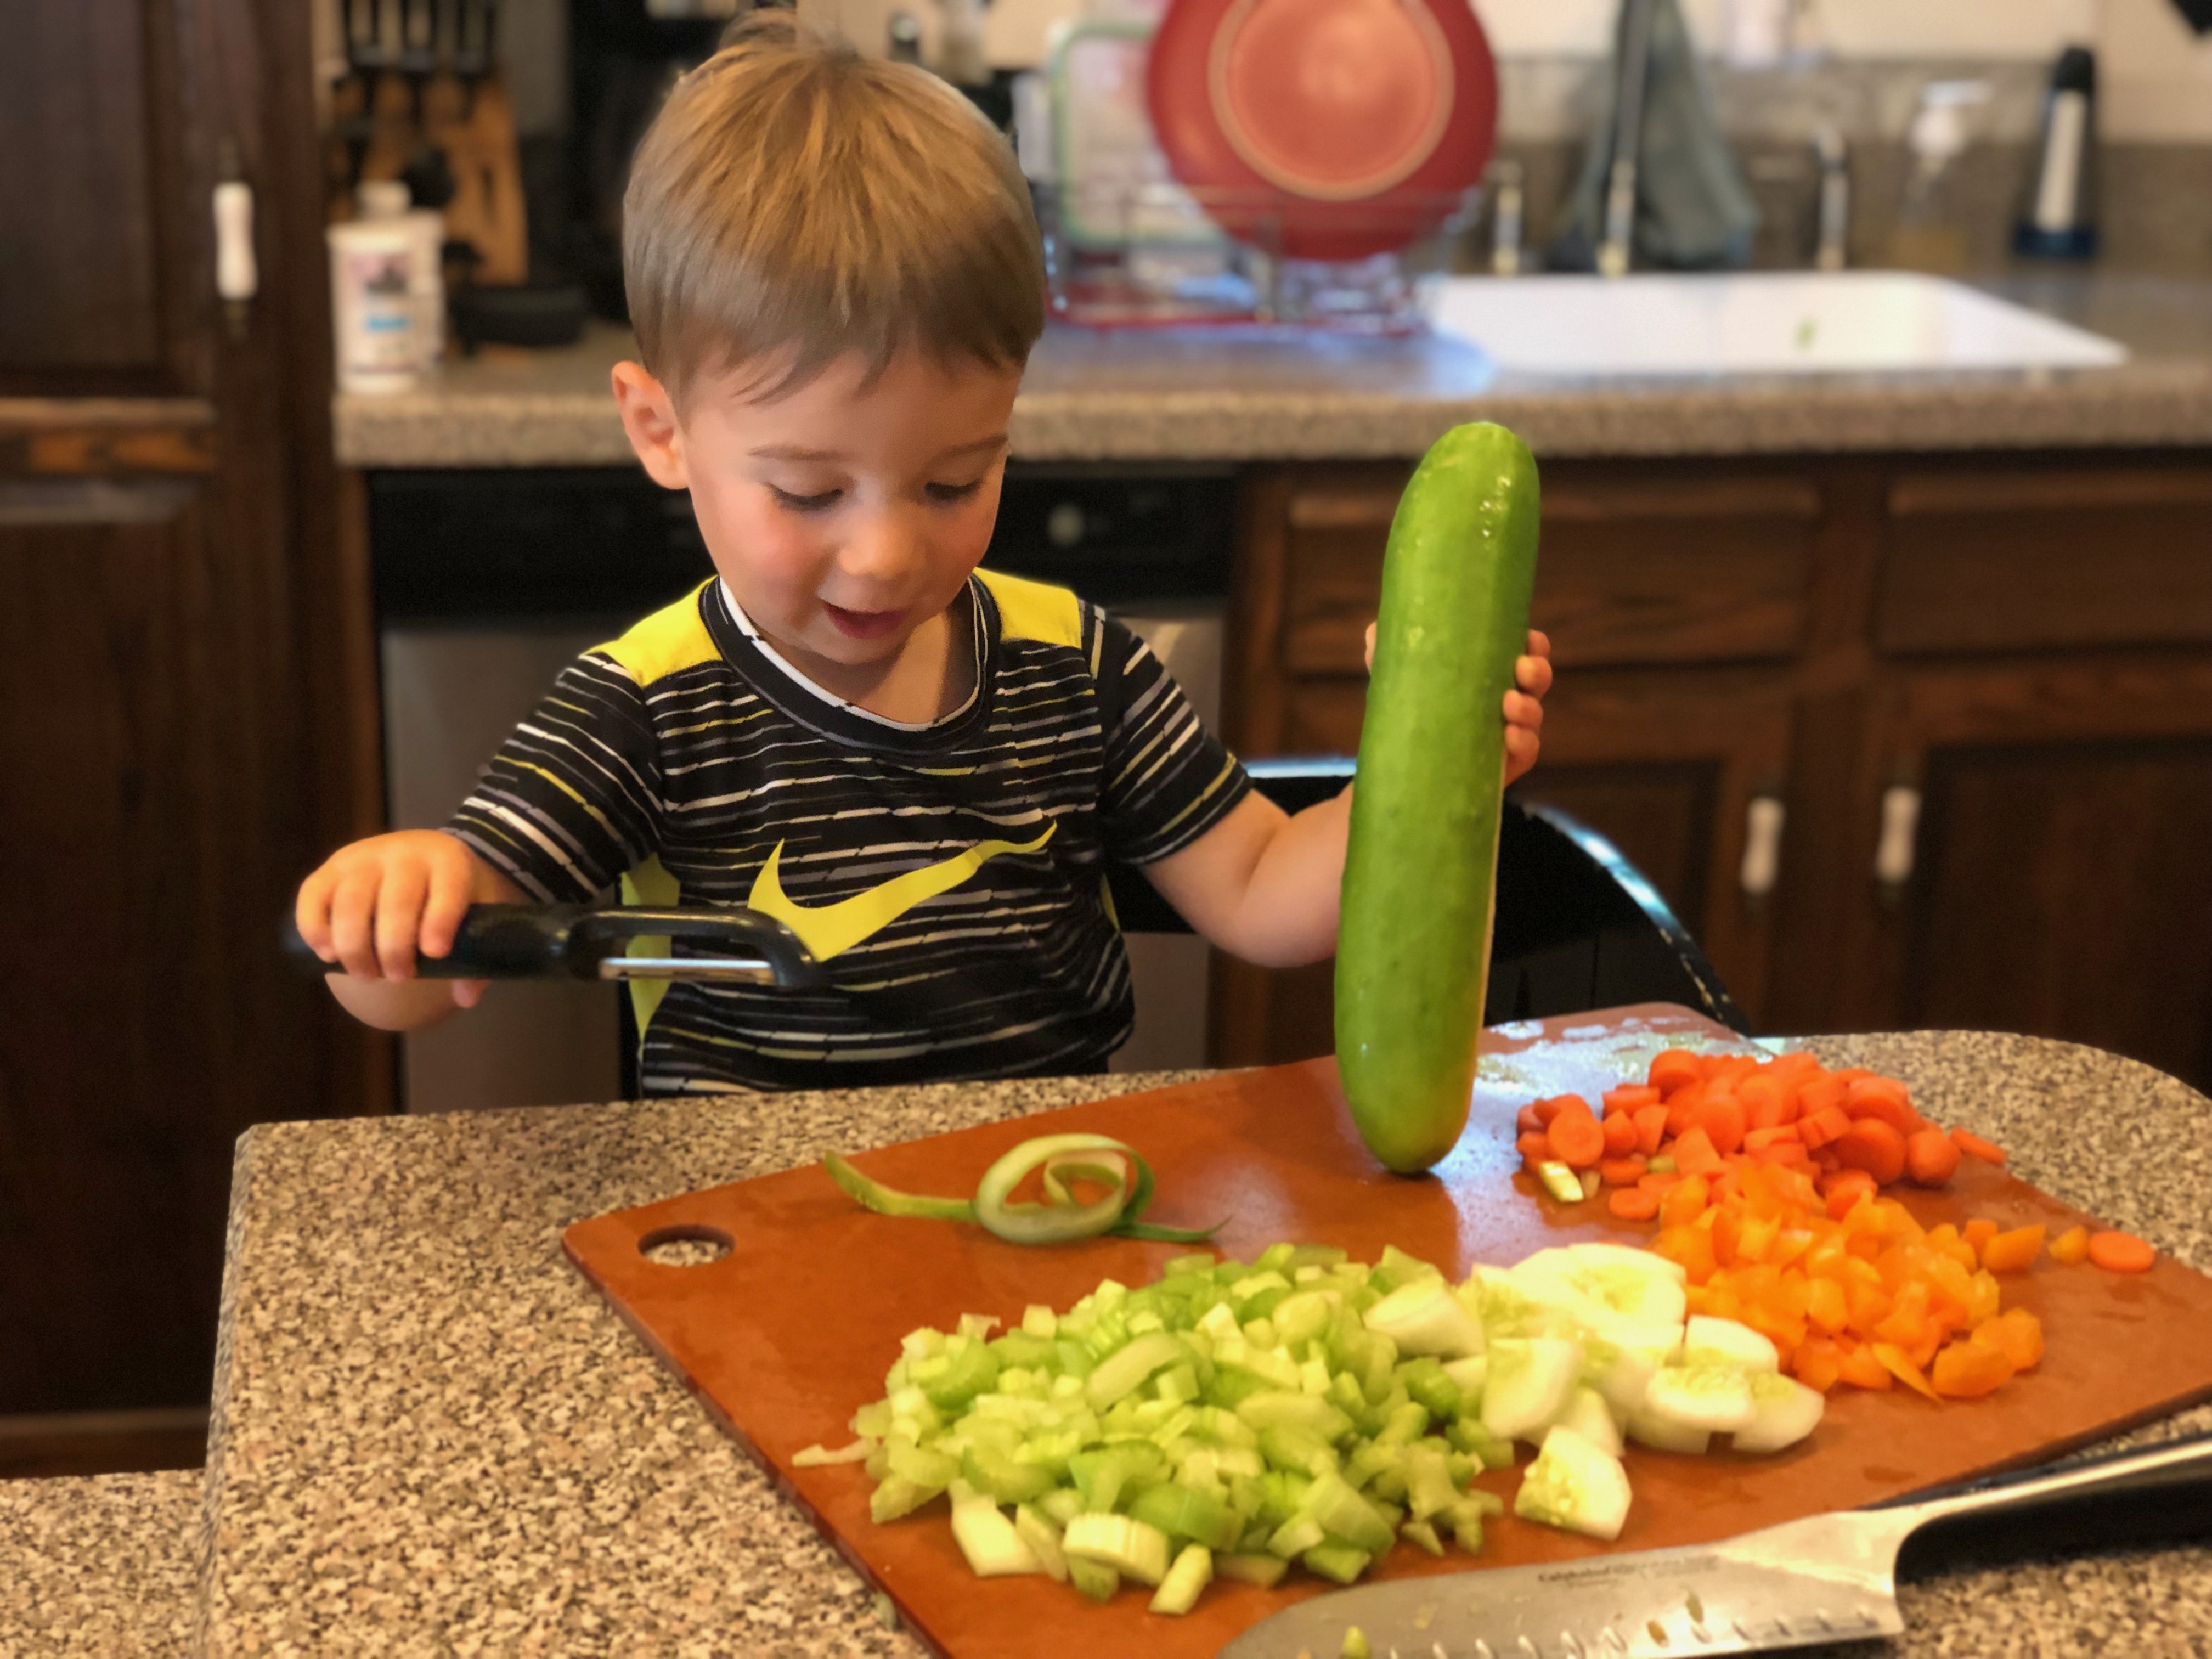 Lincoln cutting vegetables- surprised look